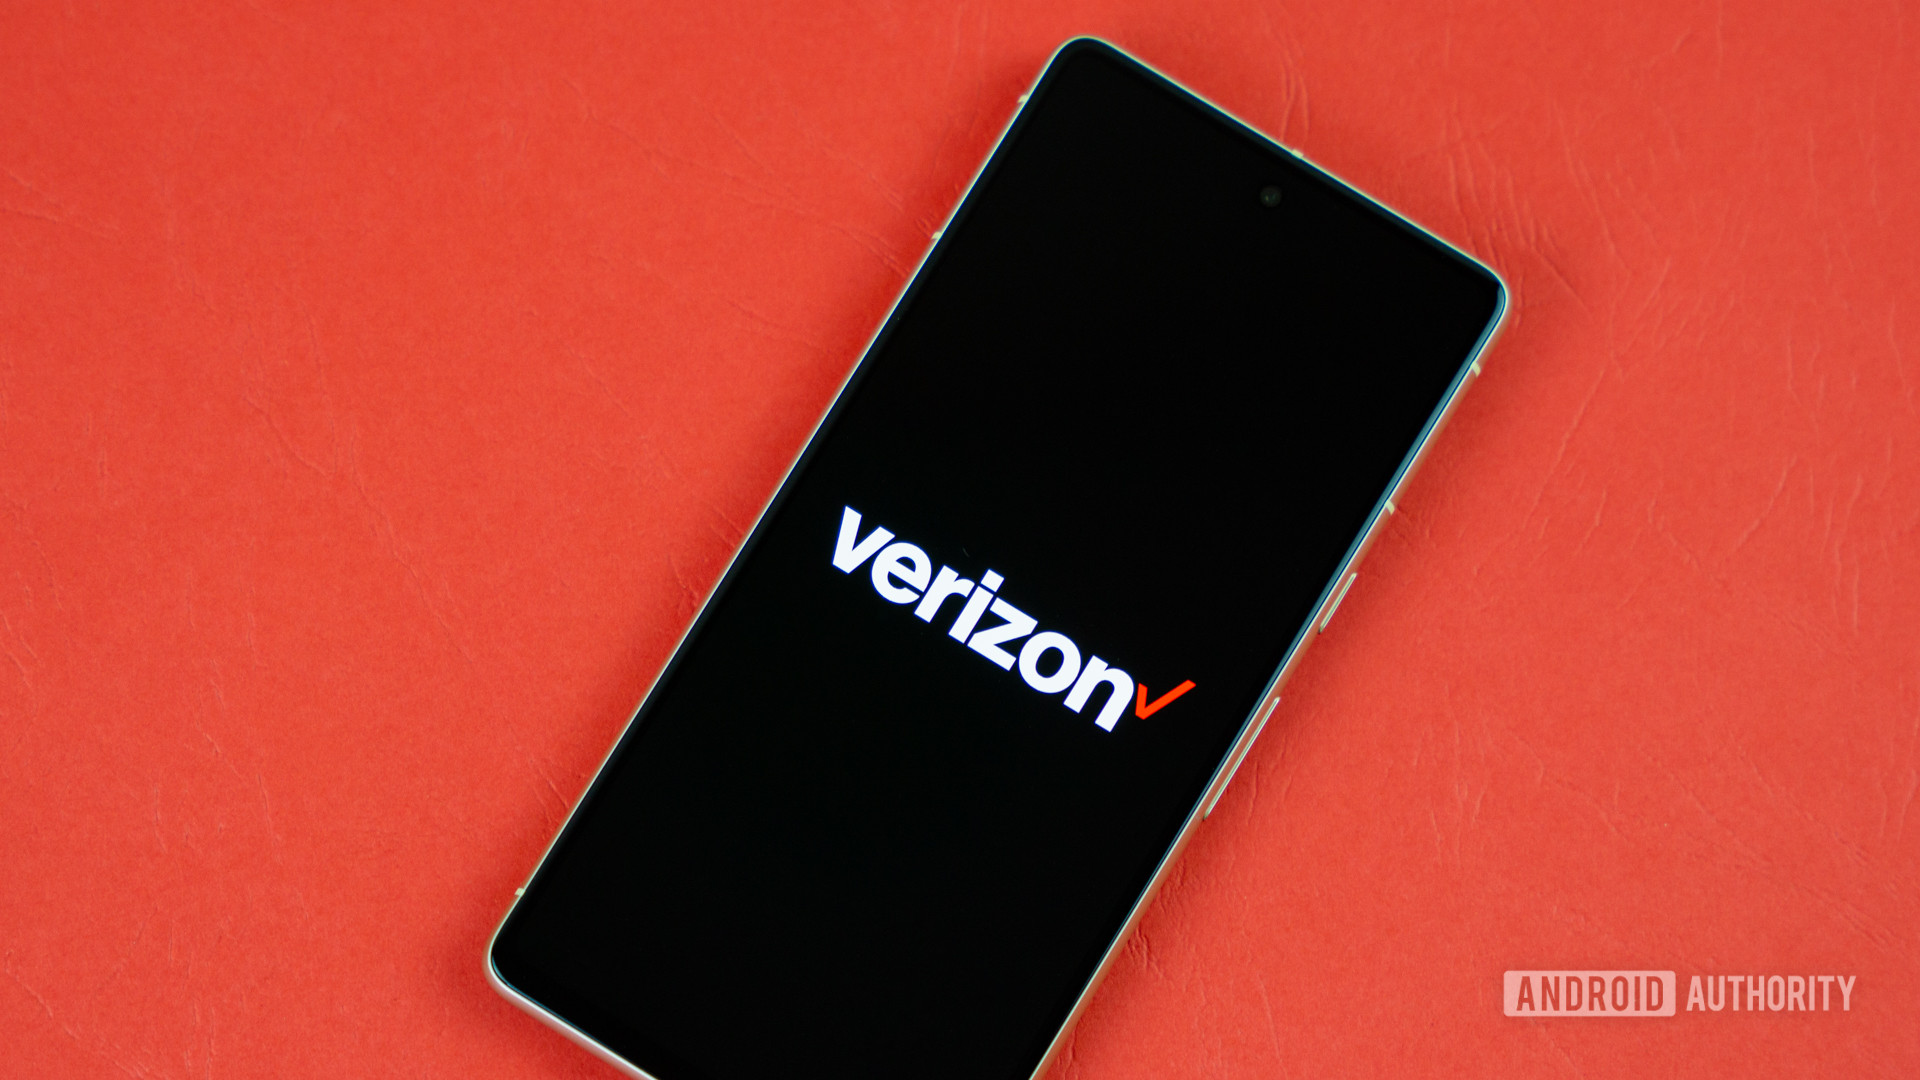 Verizon logo on smartphone with a colored background Stock photo 1